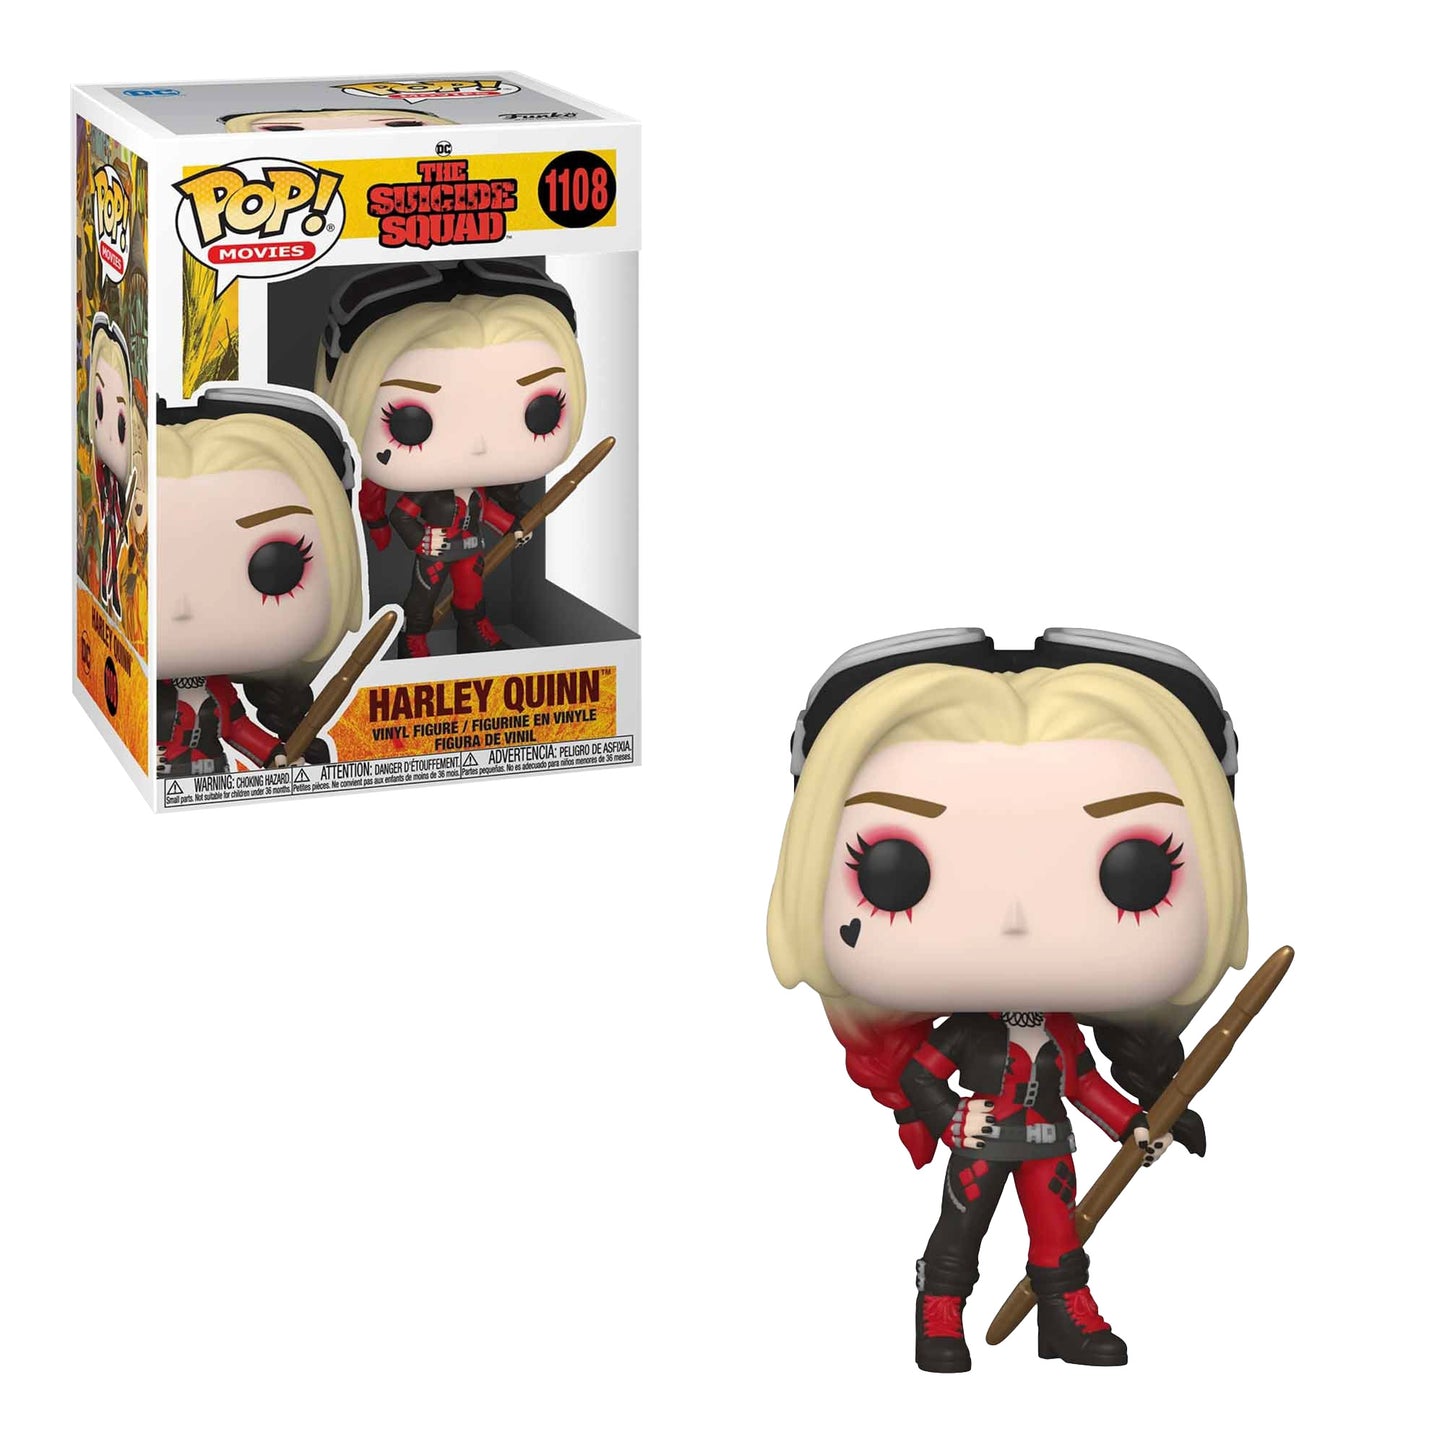 Funko Pop! Movies: DC - The Suicide Squad - Harley Quinn #1108